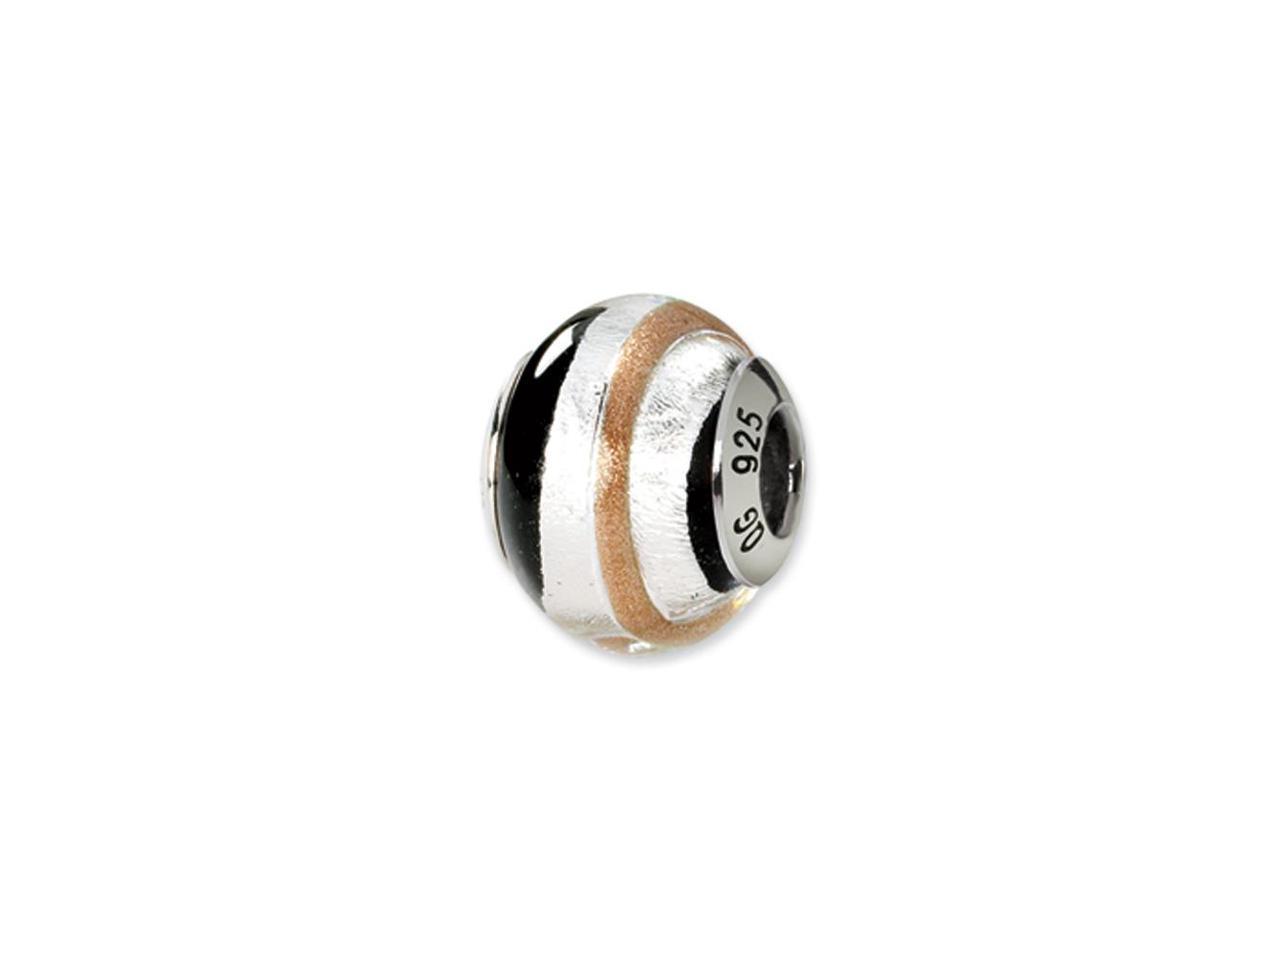 Blue and White Striped Murano Glass Charm Black Bow Jewelry Sterling Silver